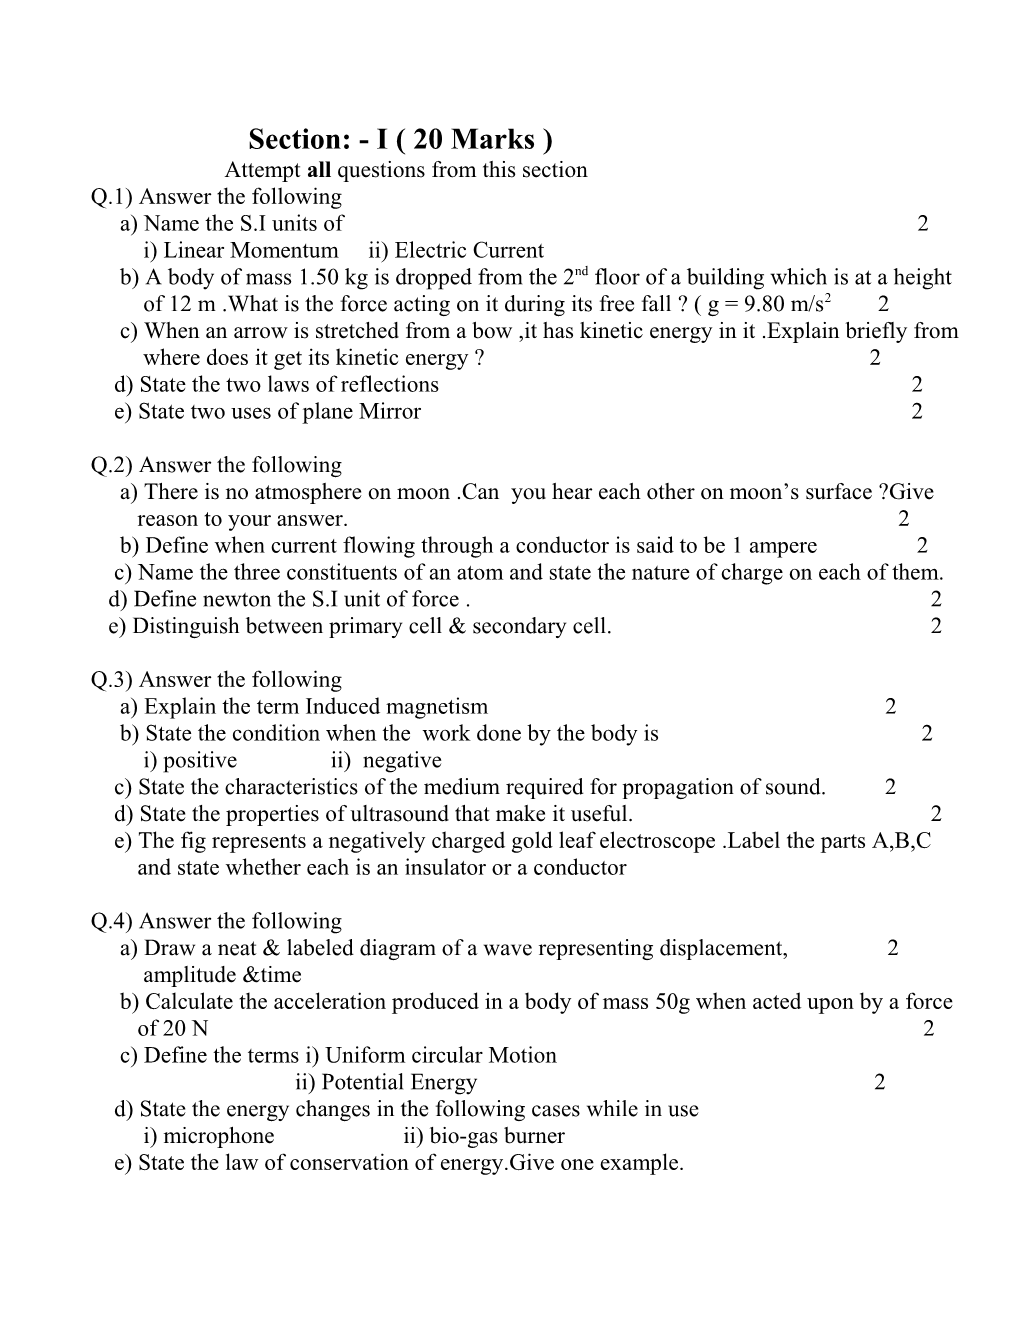 Attempt All Questions from This Section